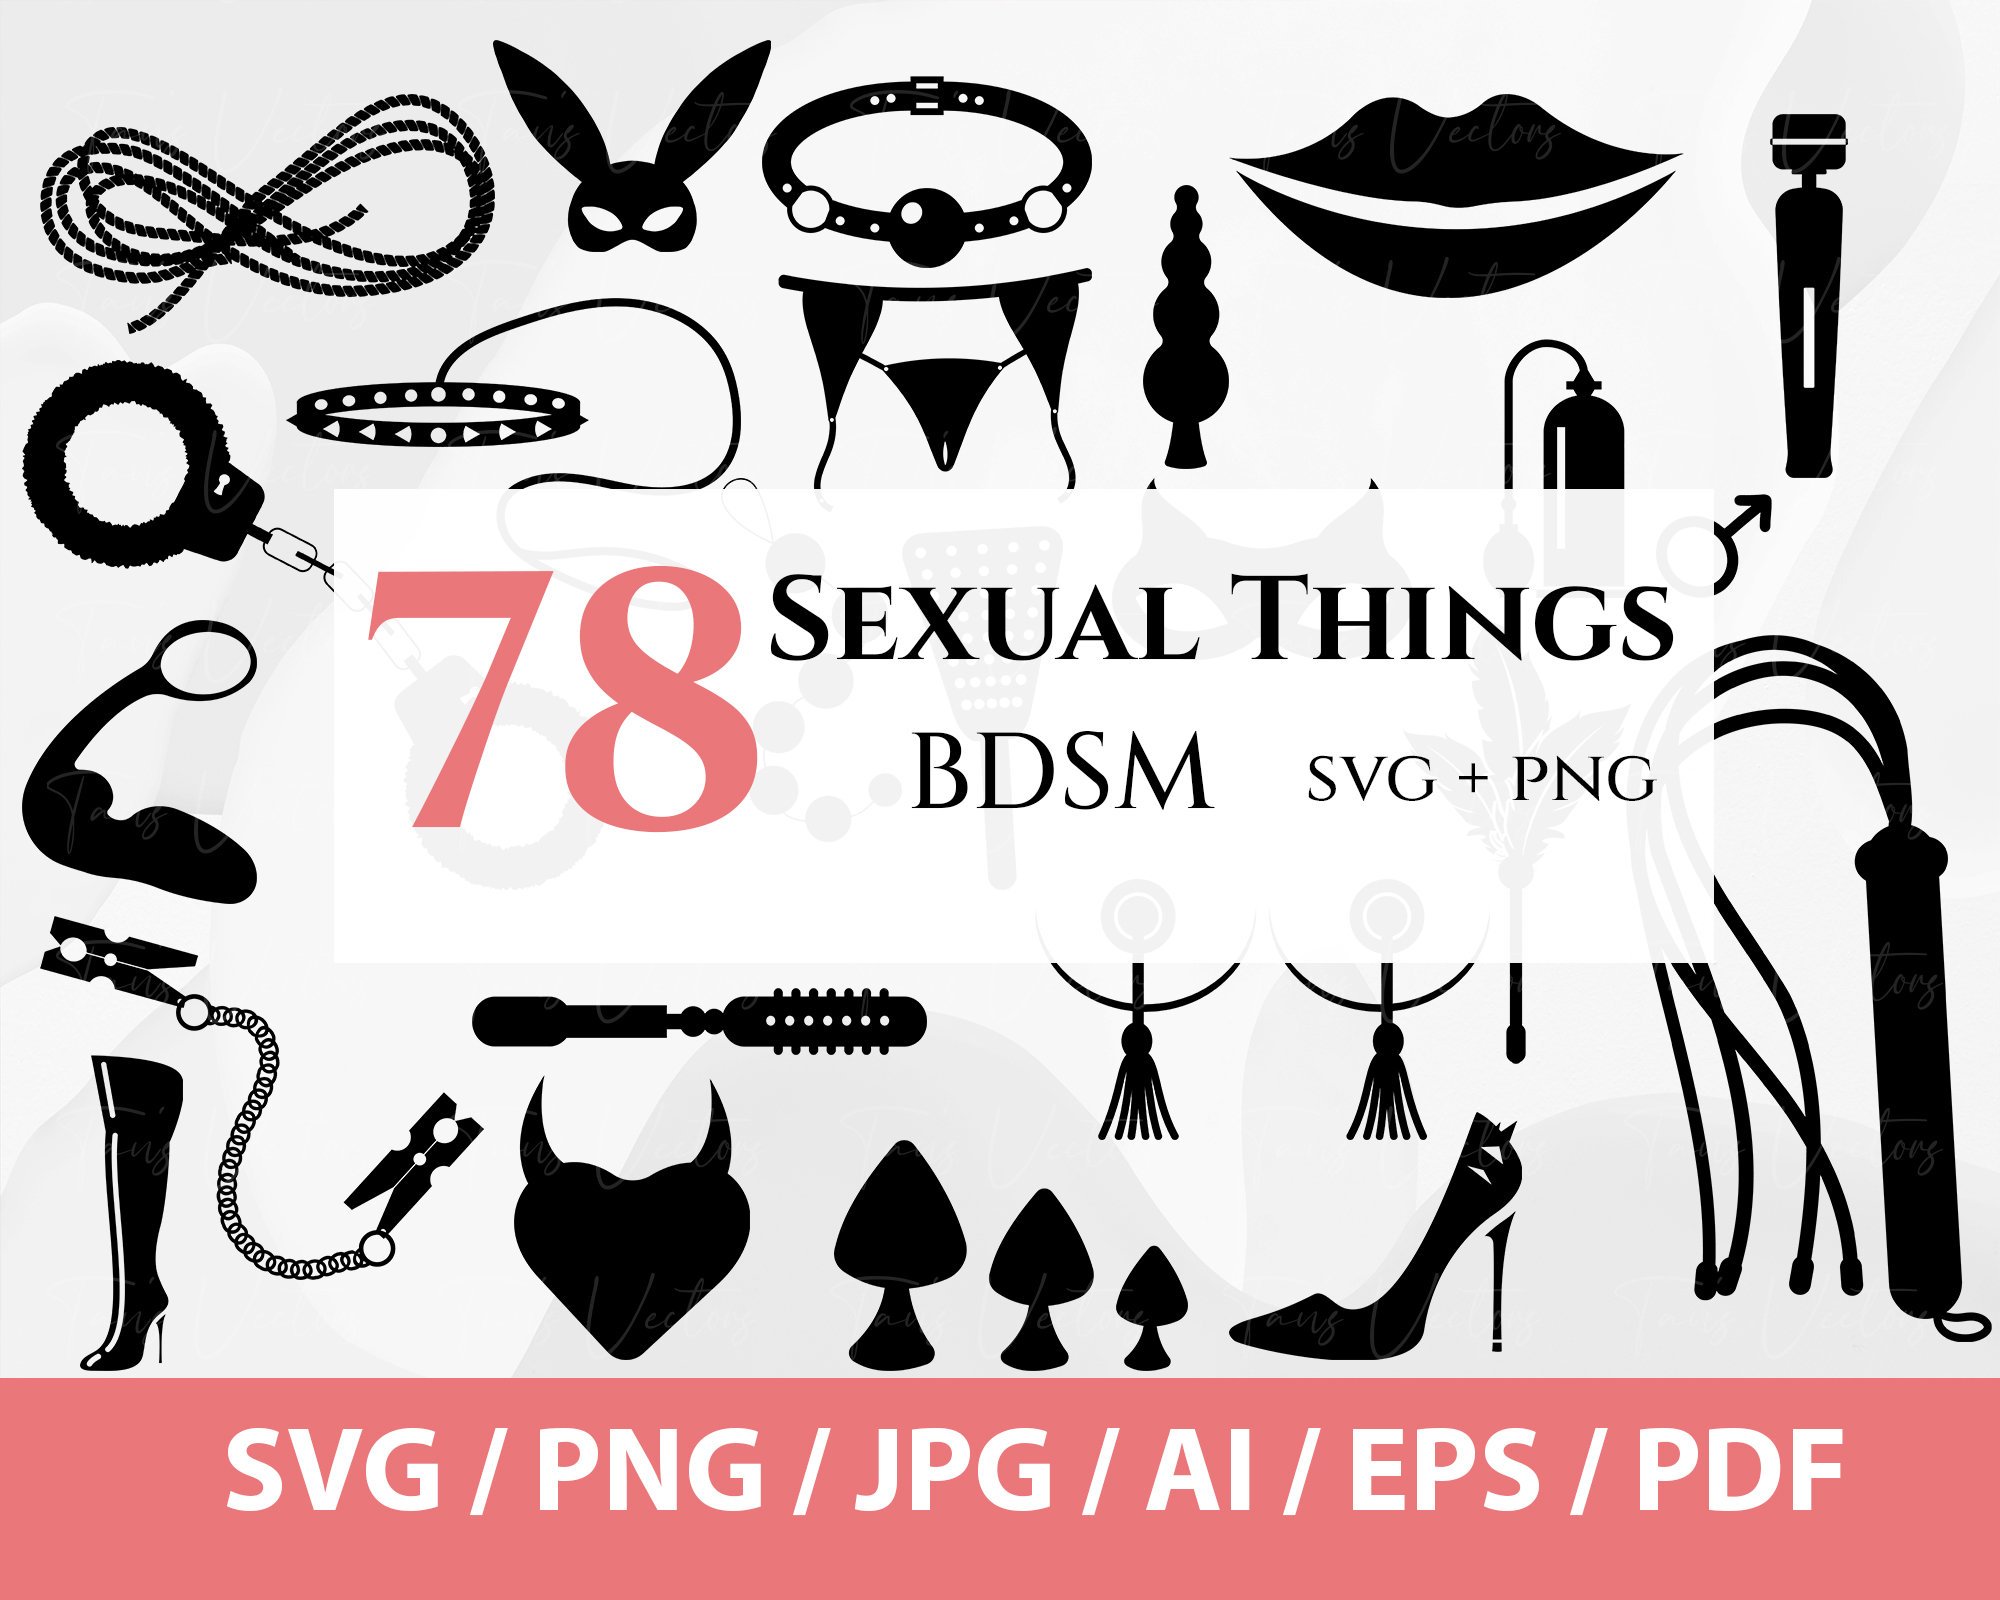 78 Sexual Things BDSM Svg Adult Sex Toys Svg Handcuffs pic